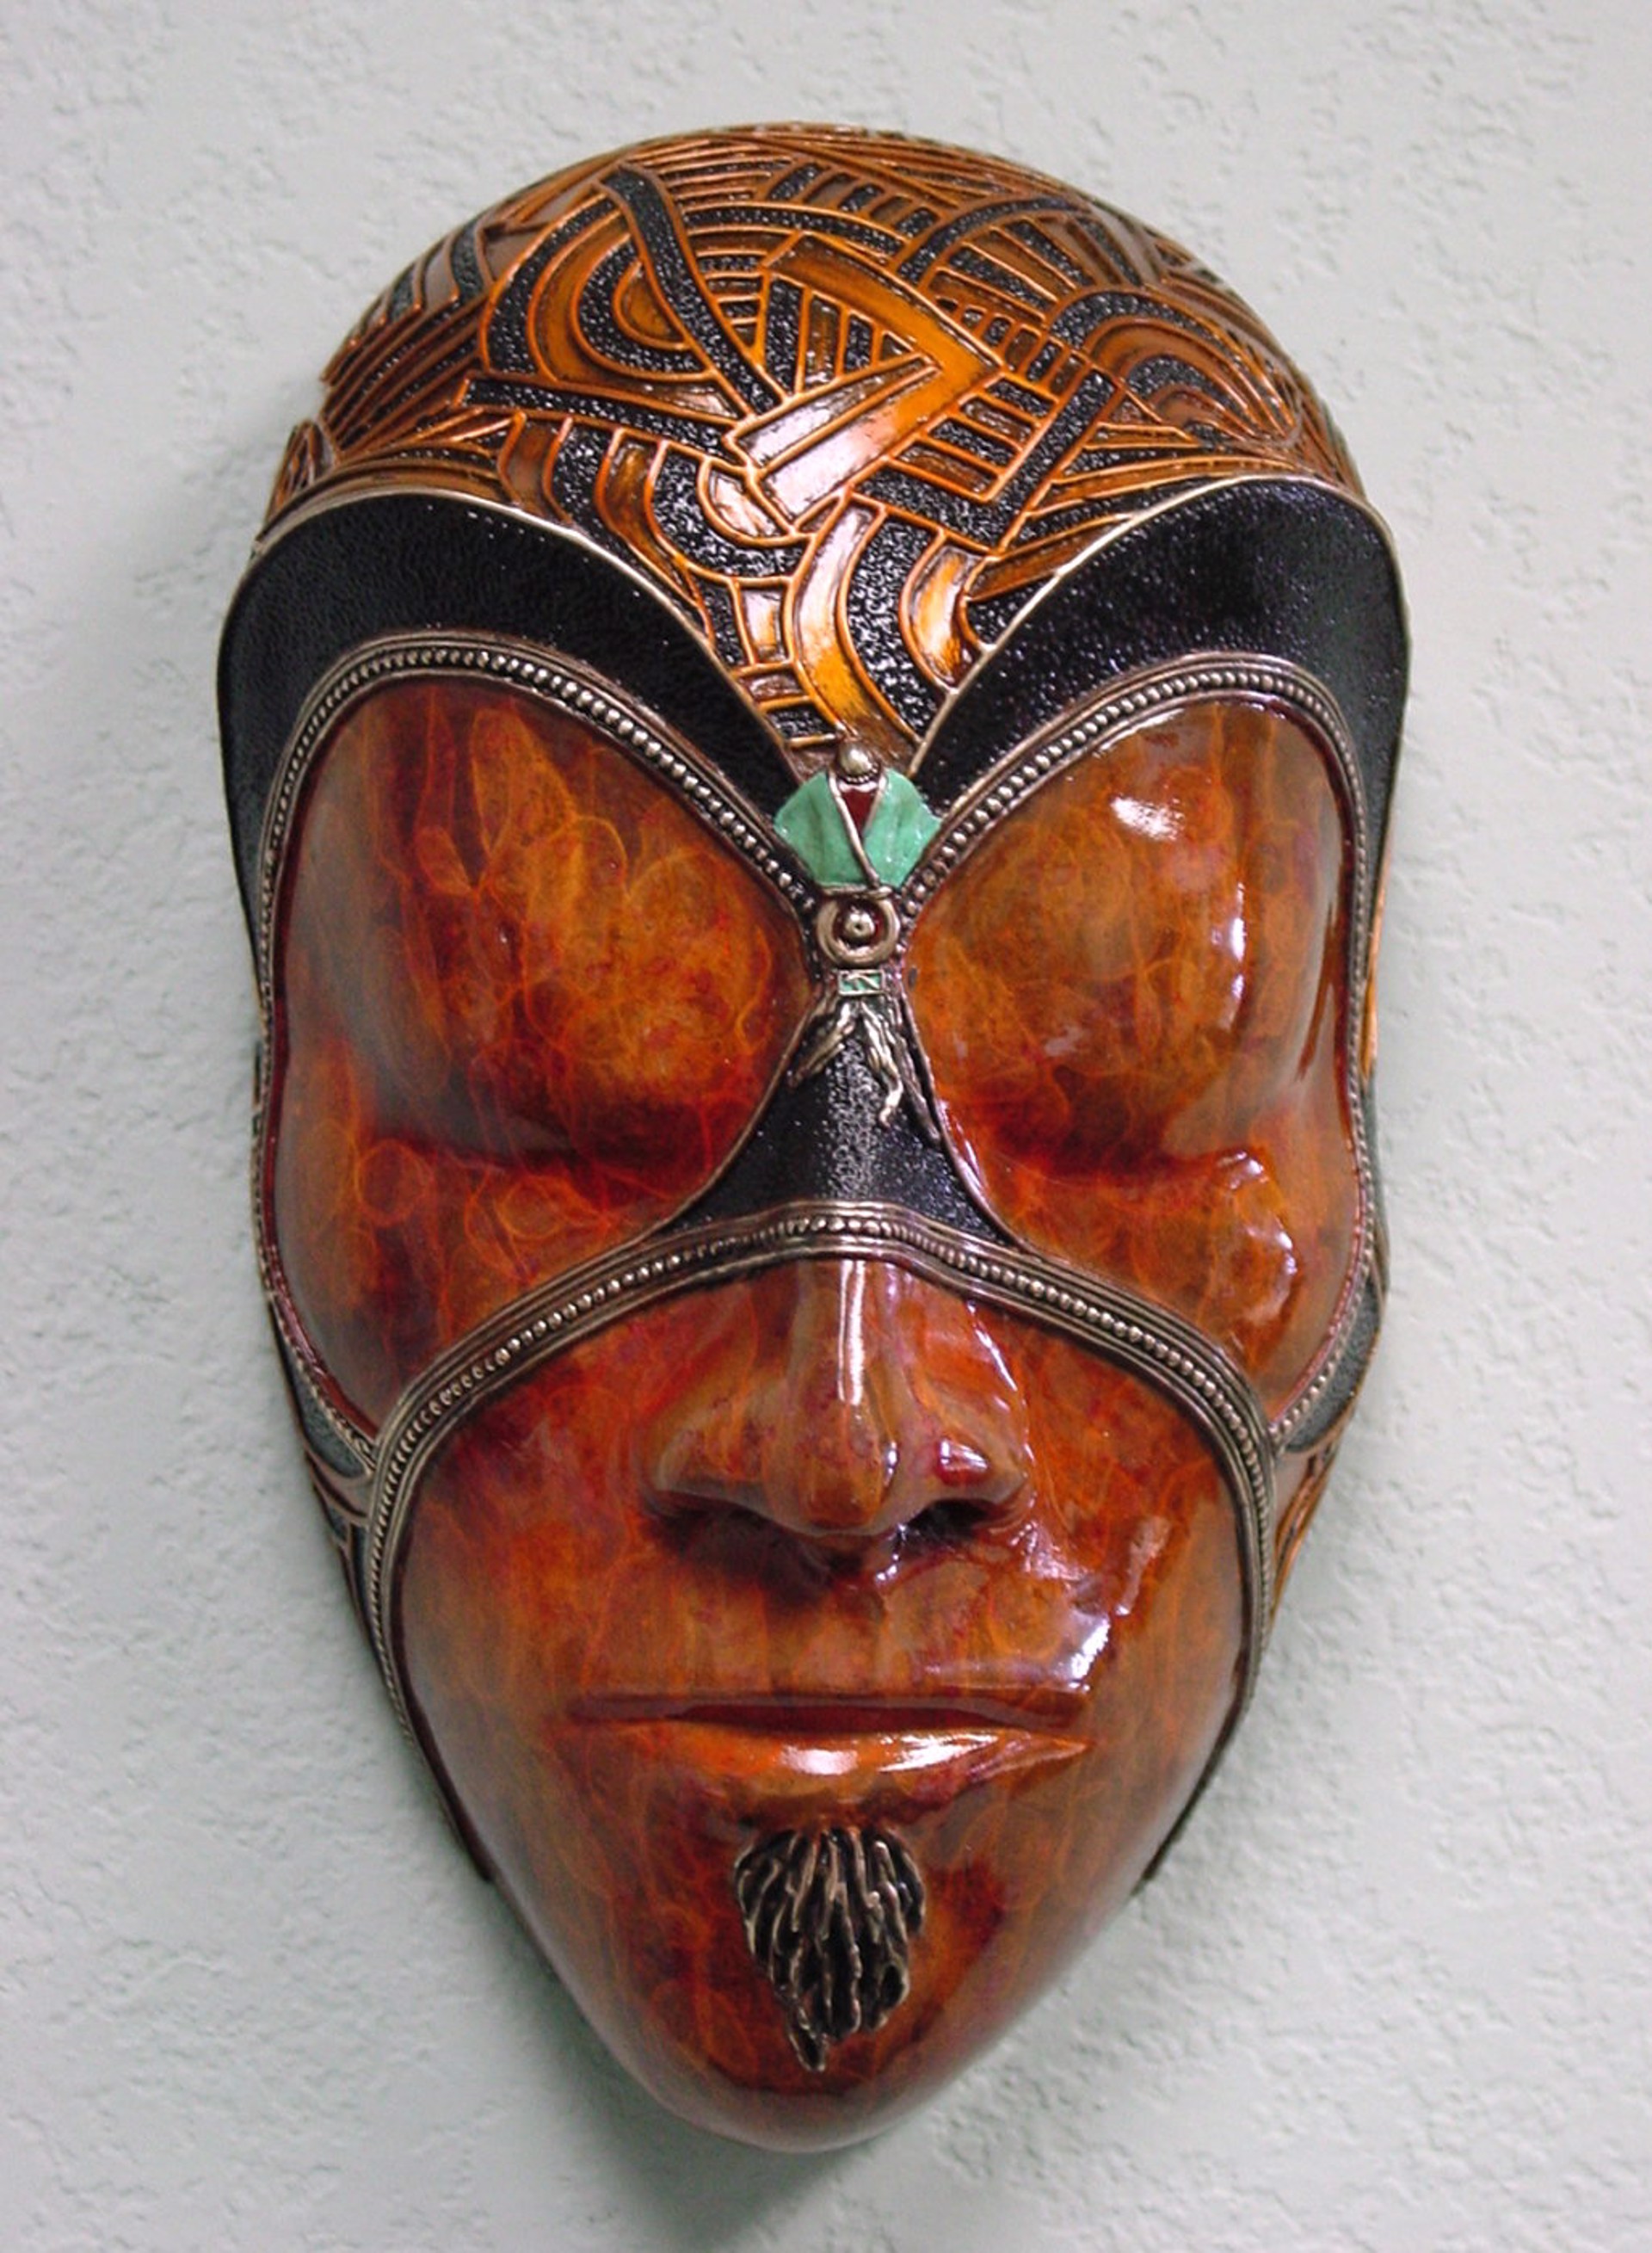 Fire Mask by Robert Rogers